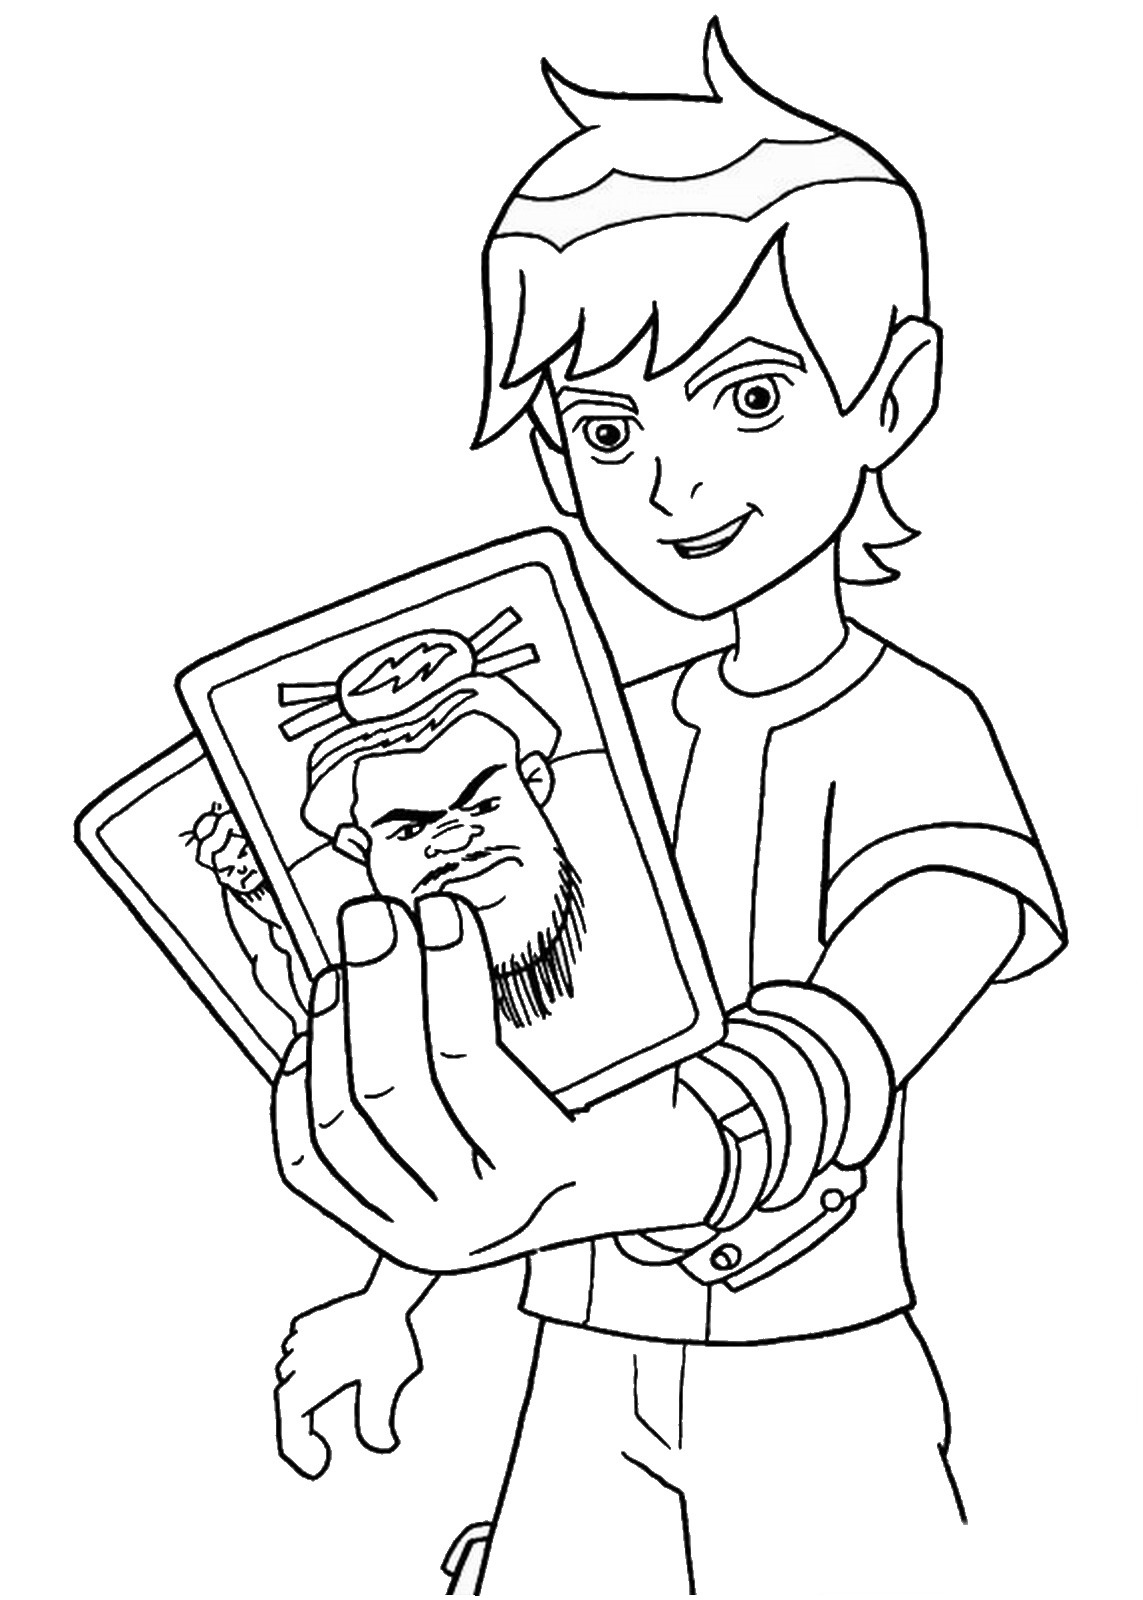 Ben With Sumo Cards Coloring Page